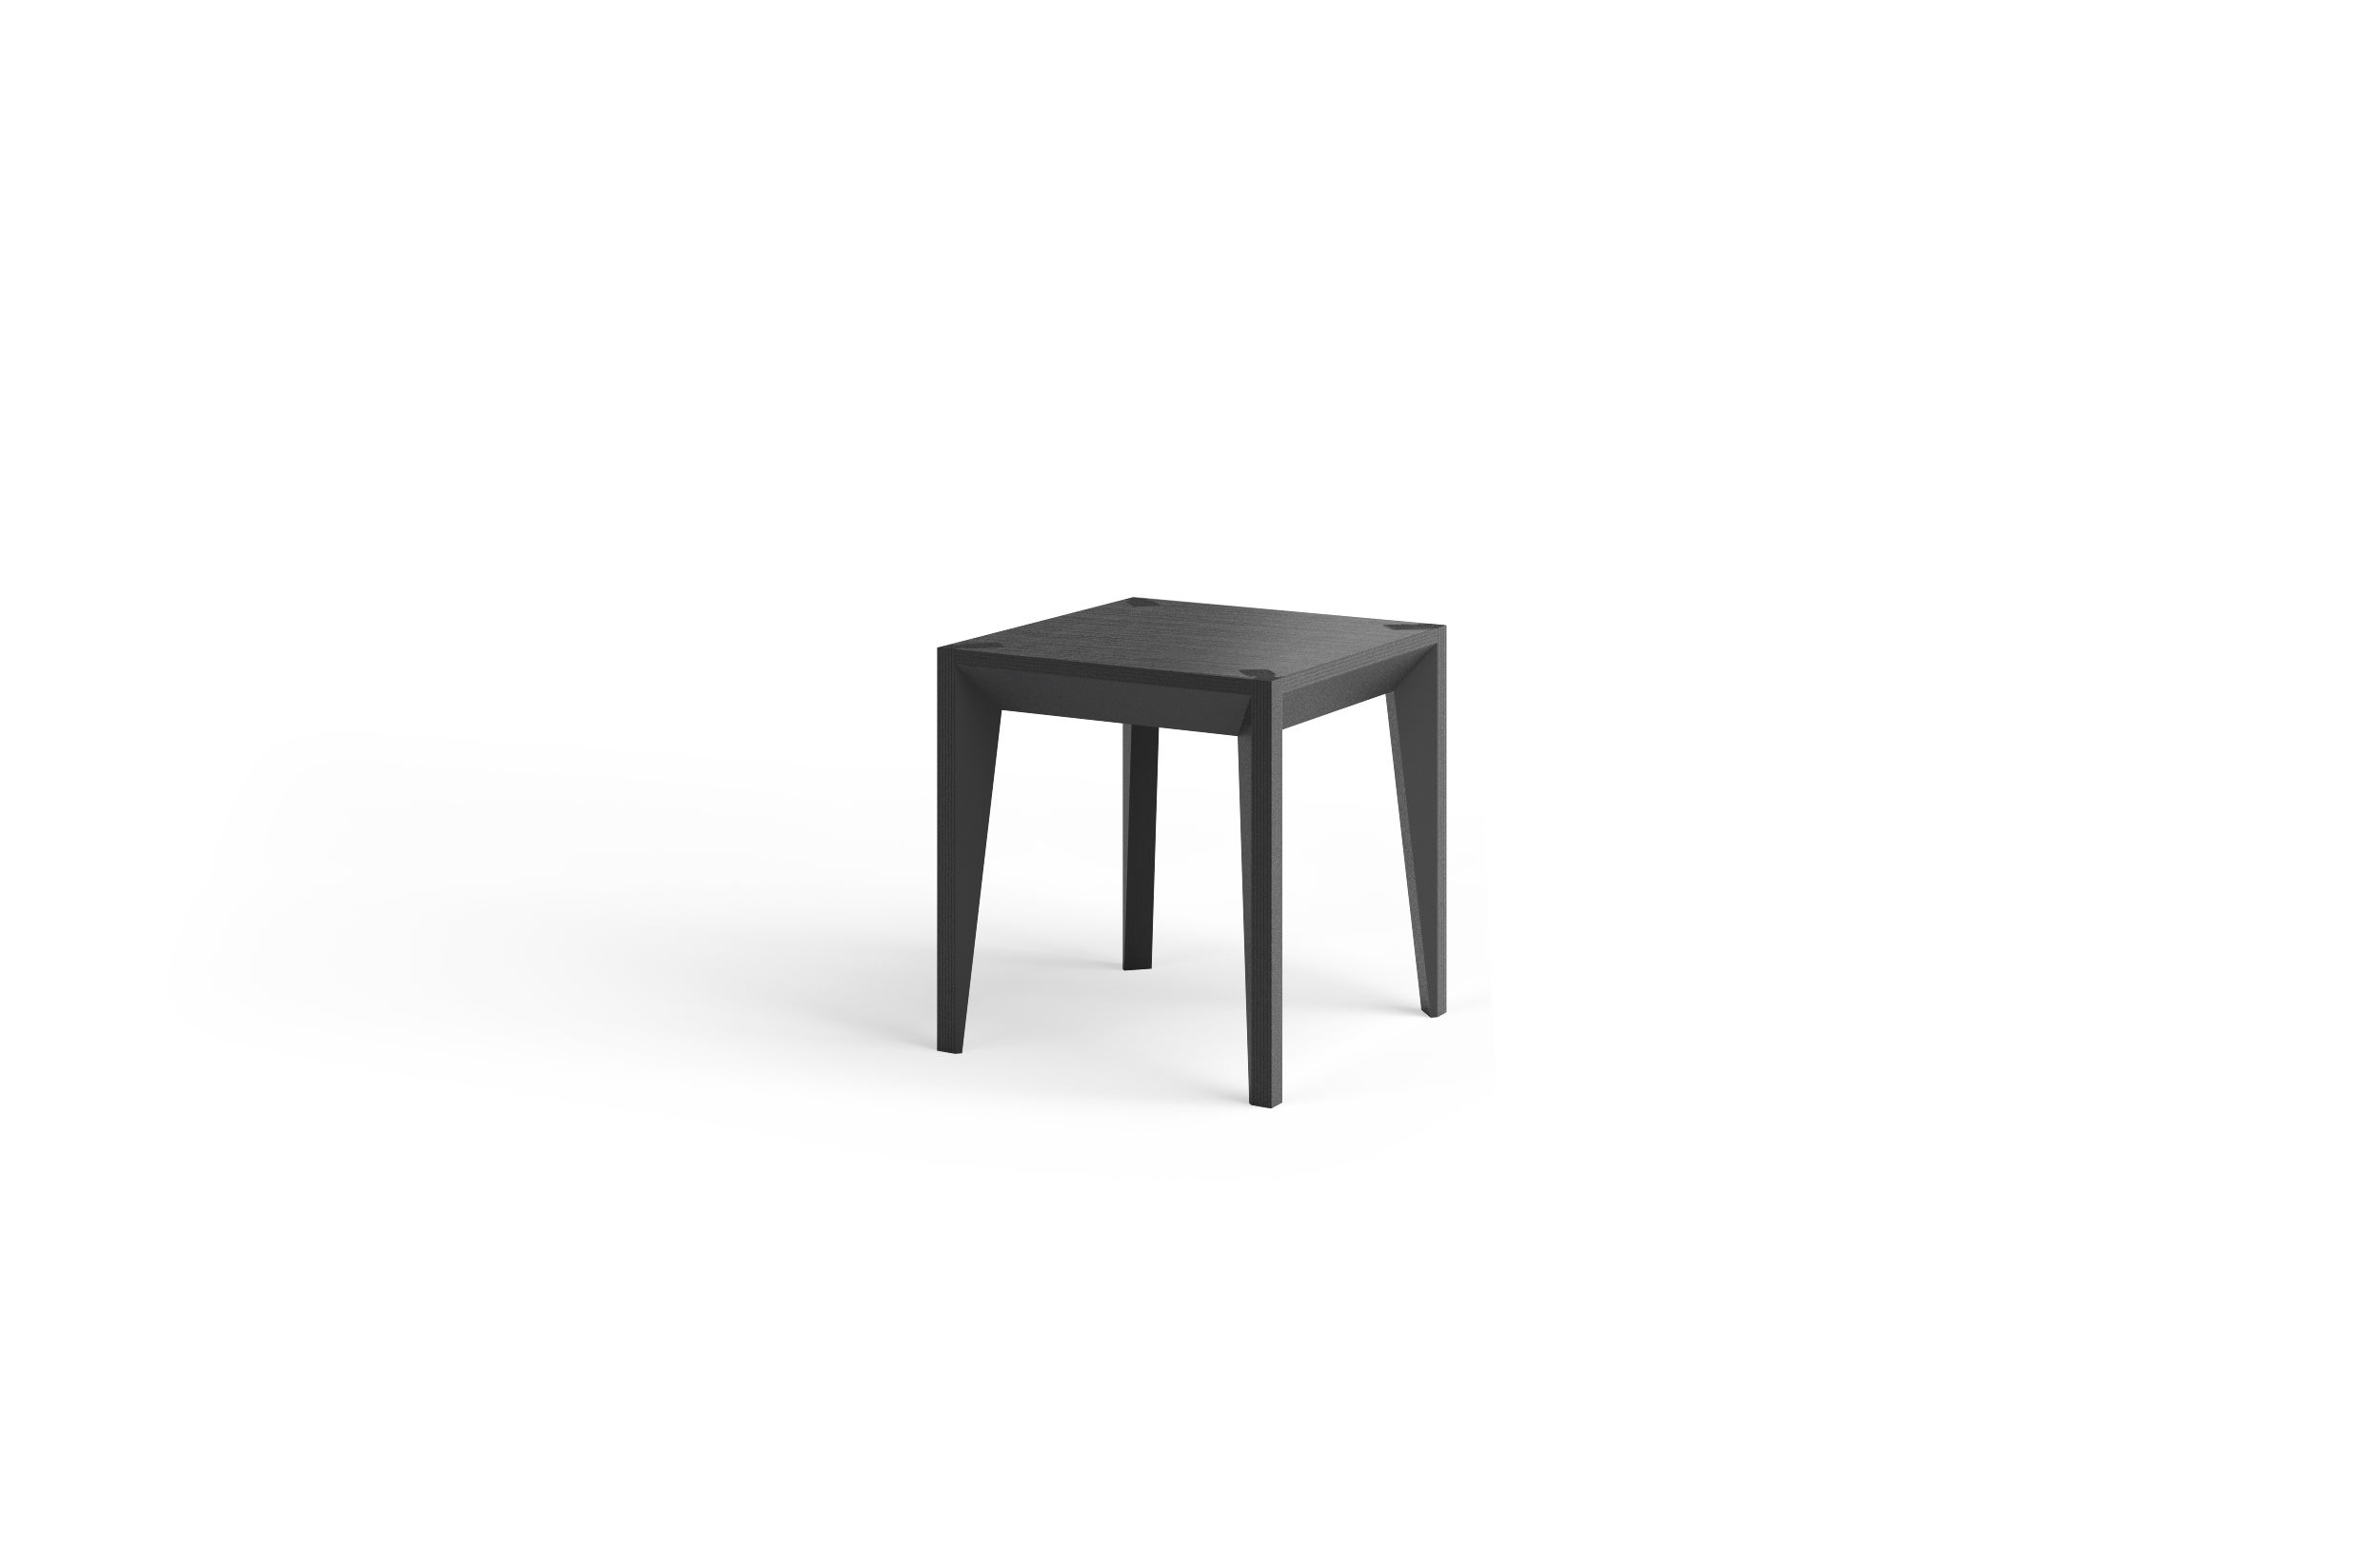 Part of the MiMi series, this Minimalist, versatile side table or stool accents the home and office. Clean, faceted geometry adds depth and sophistication while the square 17